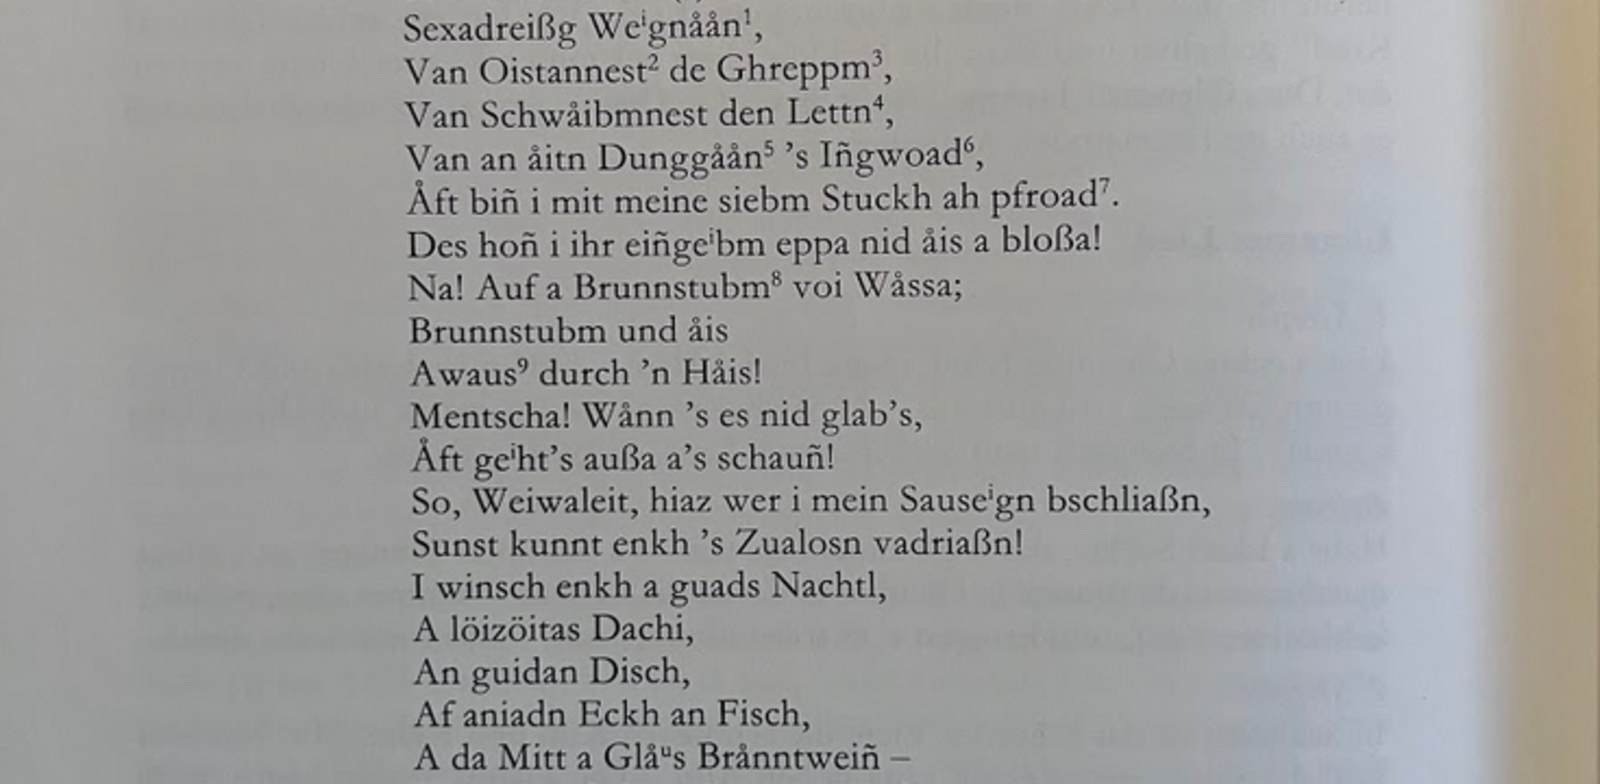 A rhyme in the Pinzgau dialect | © Heimatbuch Saalbach, Privatarchive, Michaela Mitterer